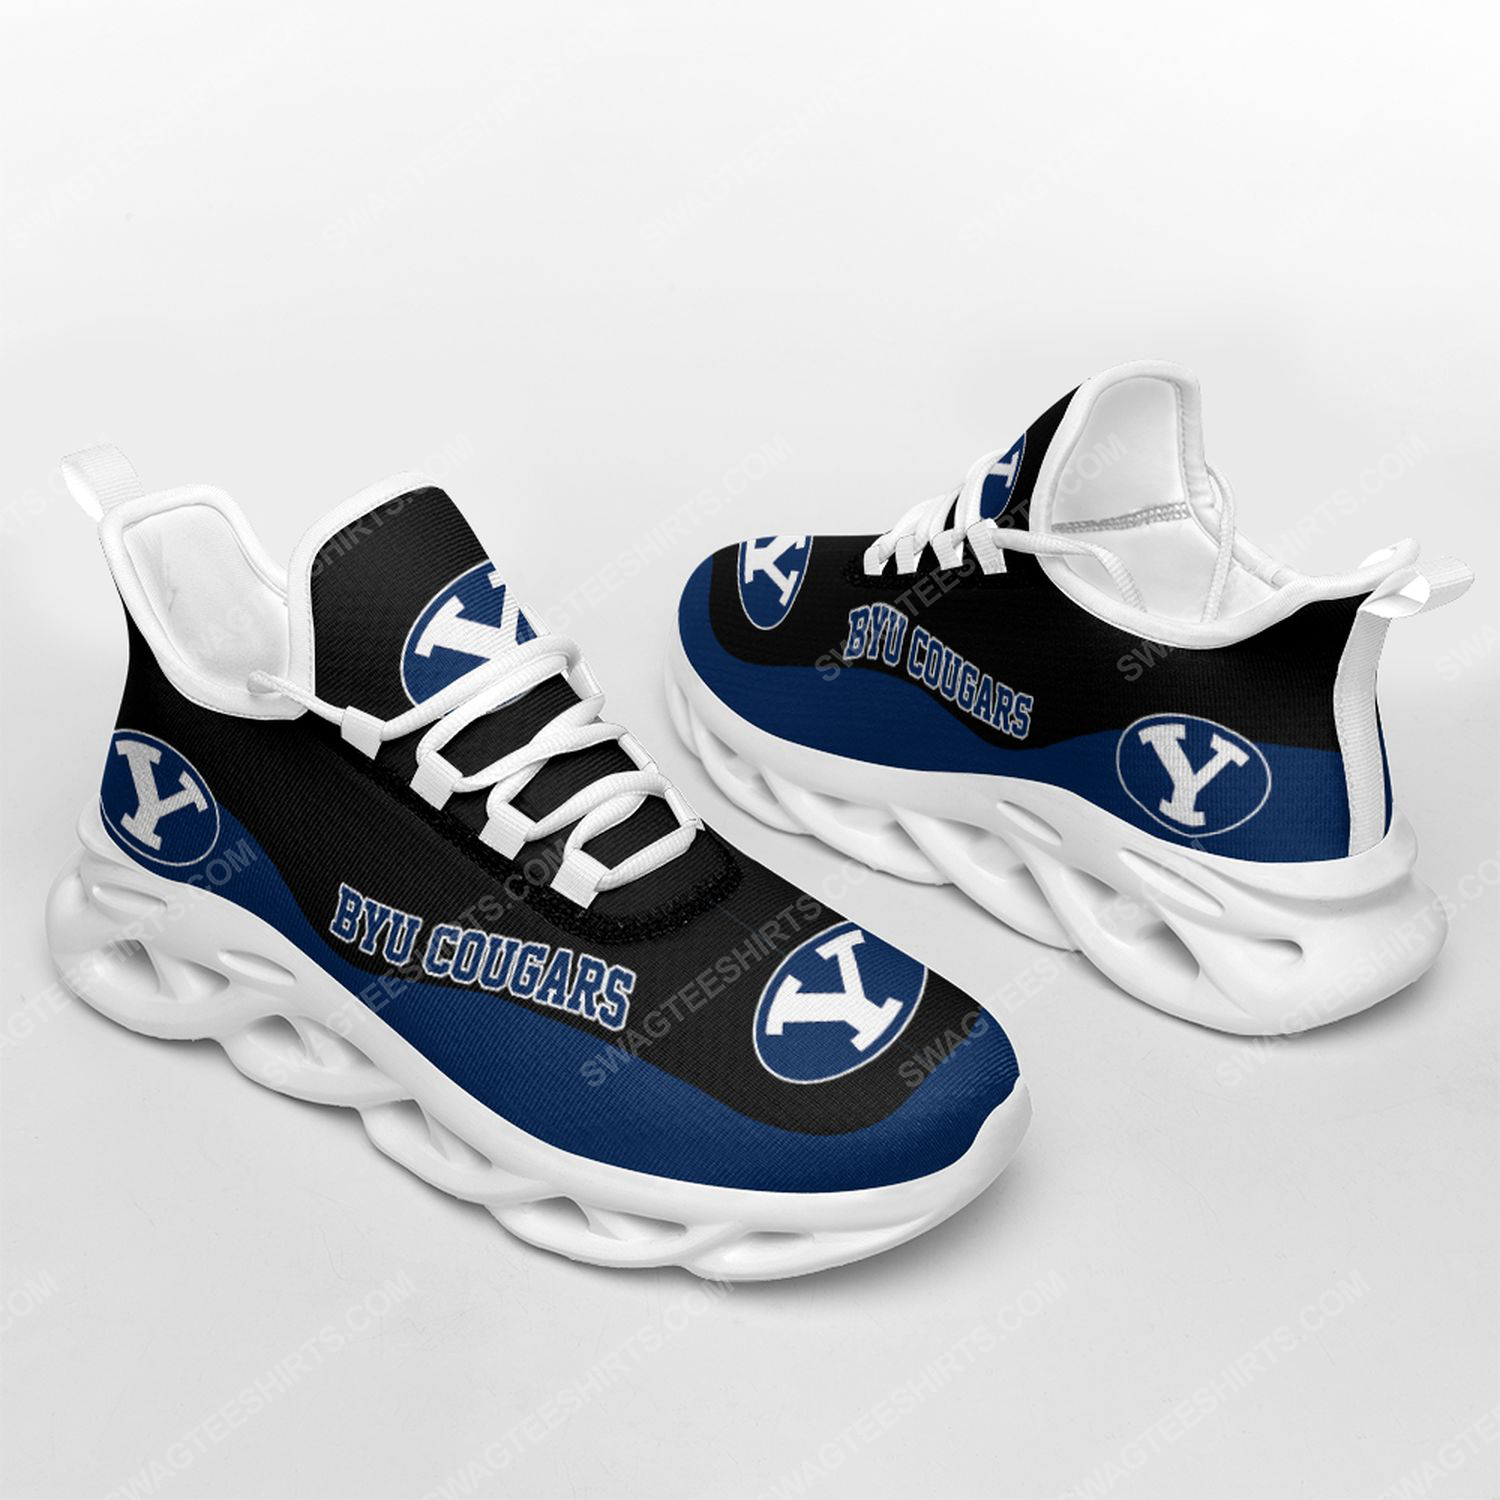 The byu cougars football team max soul shoes 2